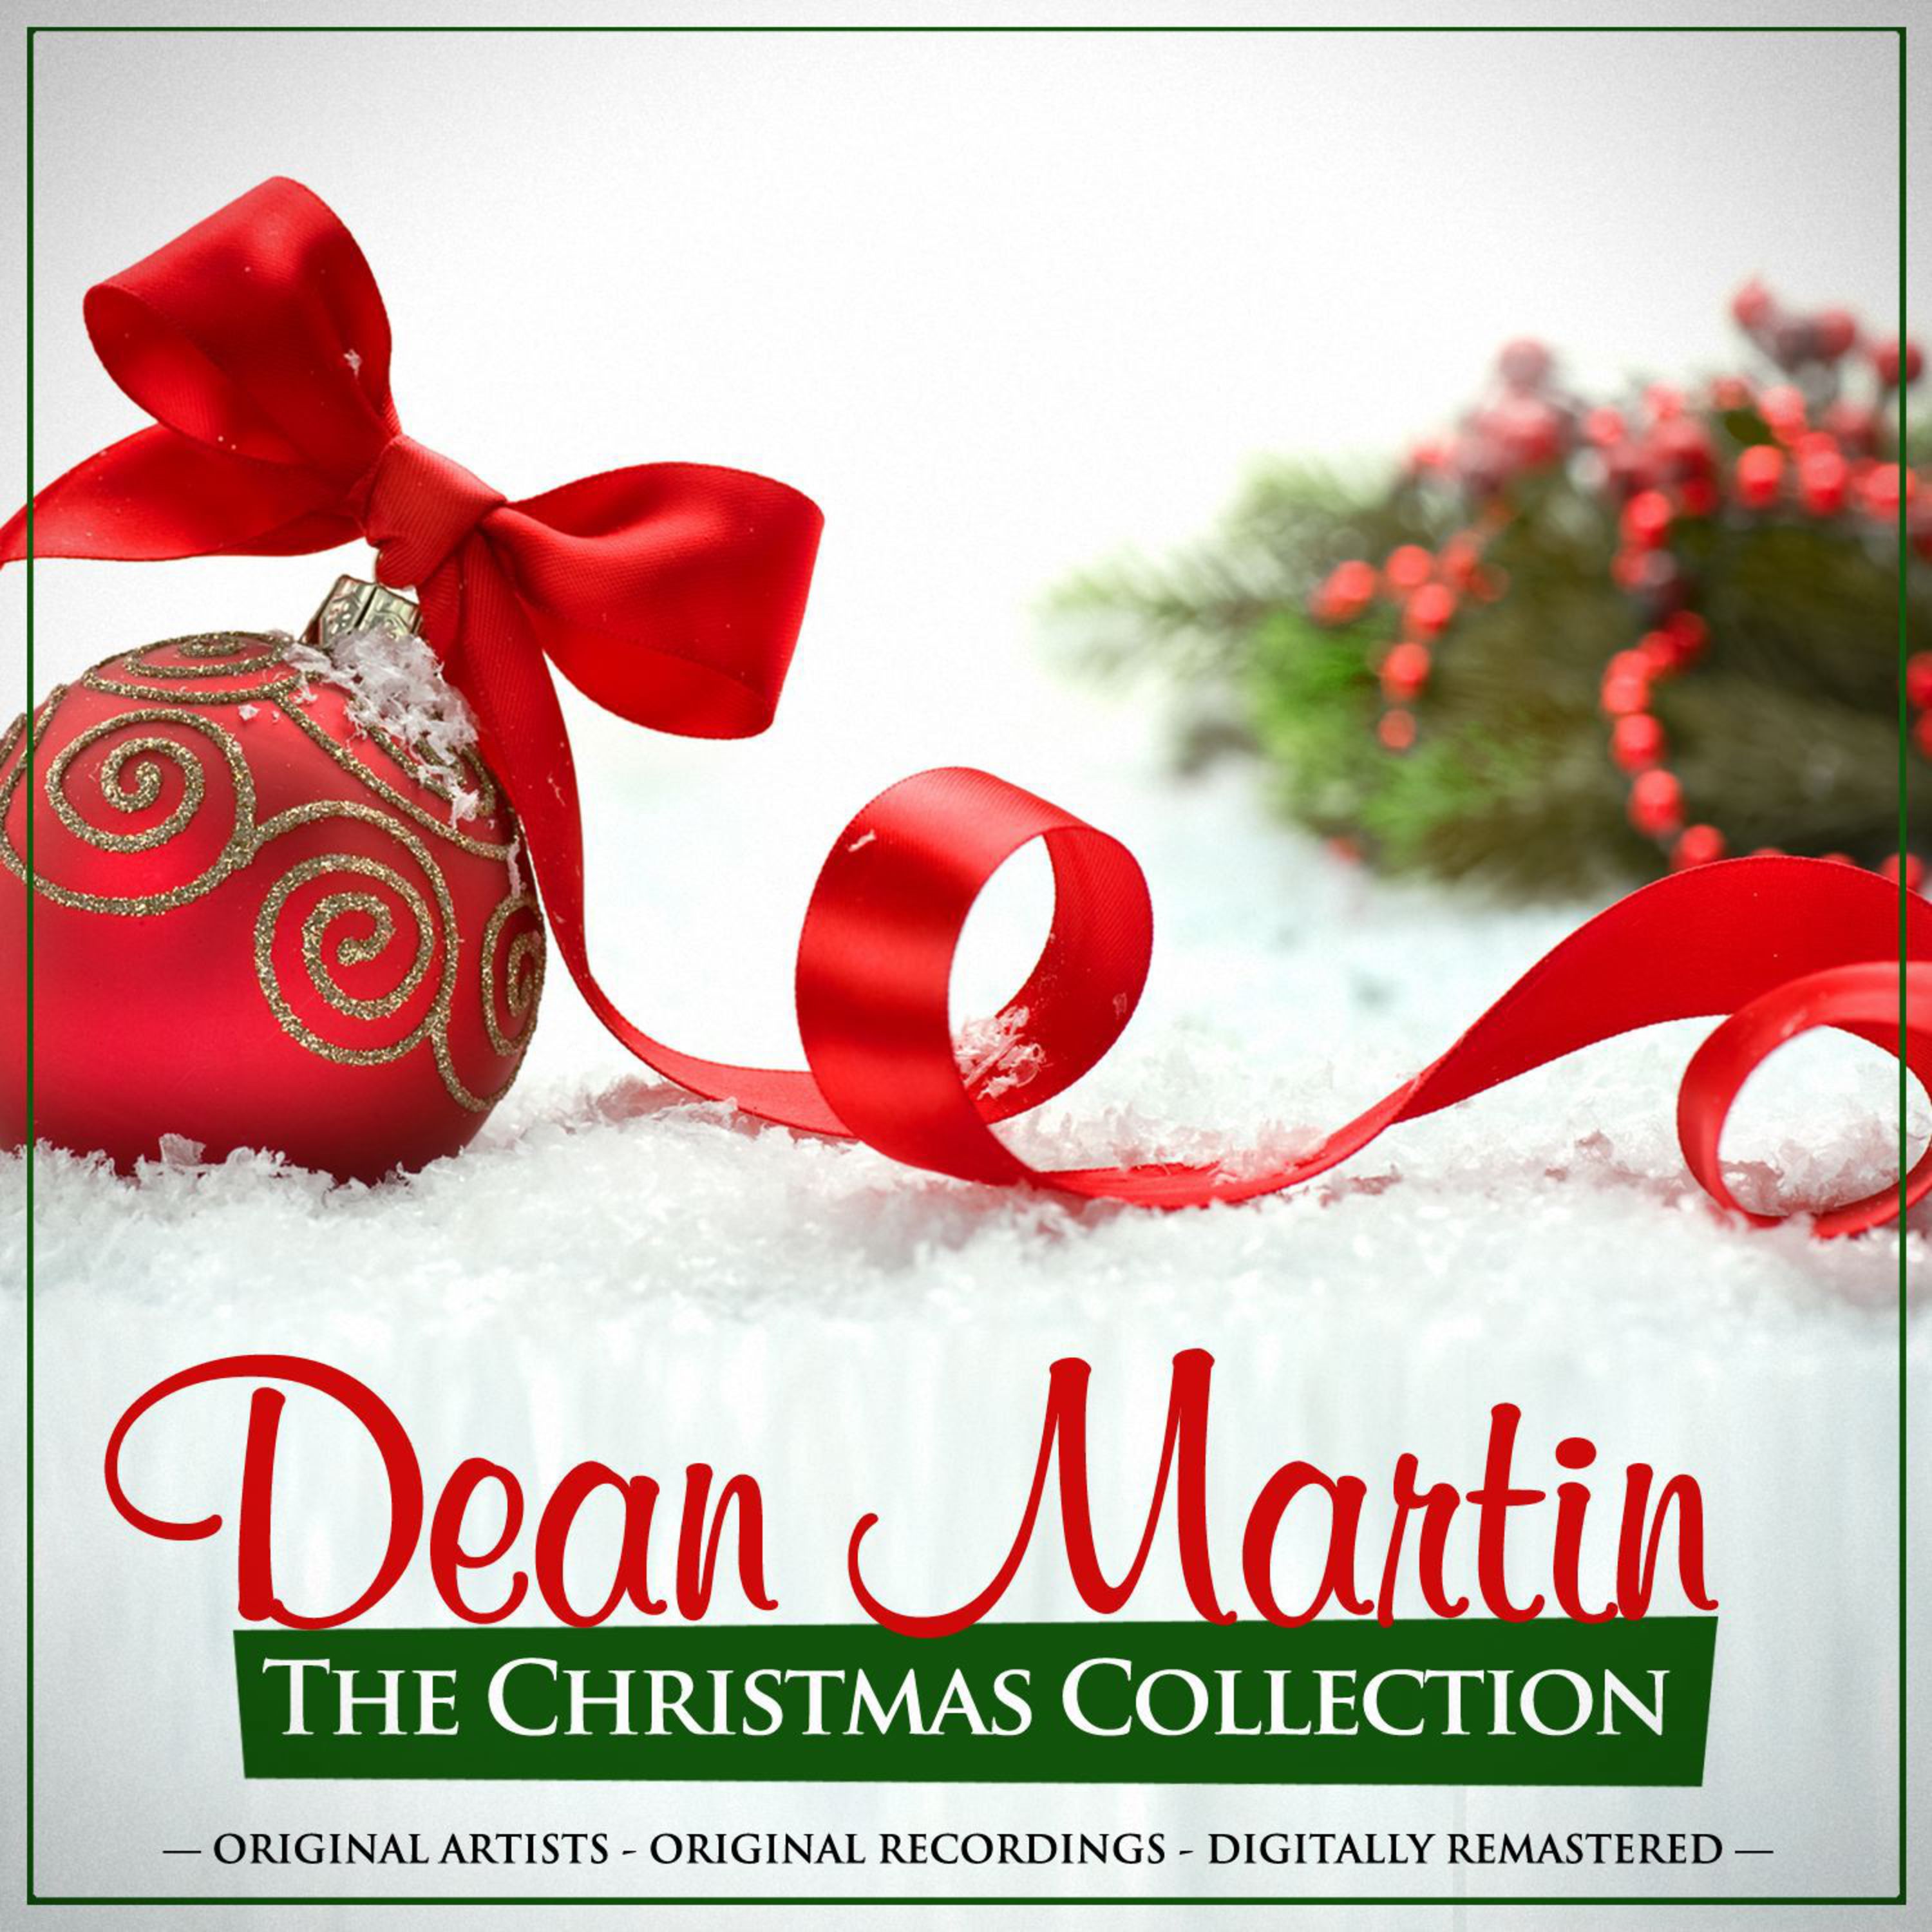 The Christmas Collection: Dean Martin (Remastered)